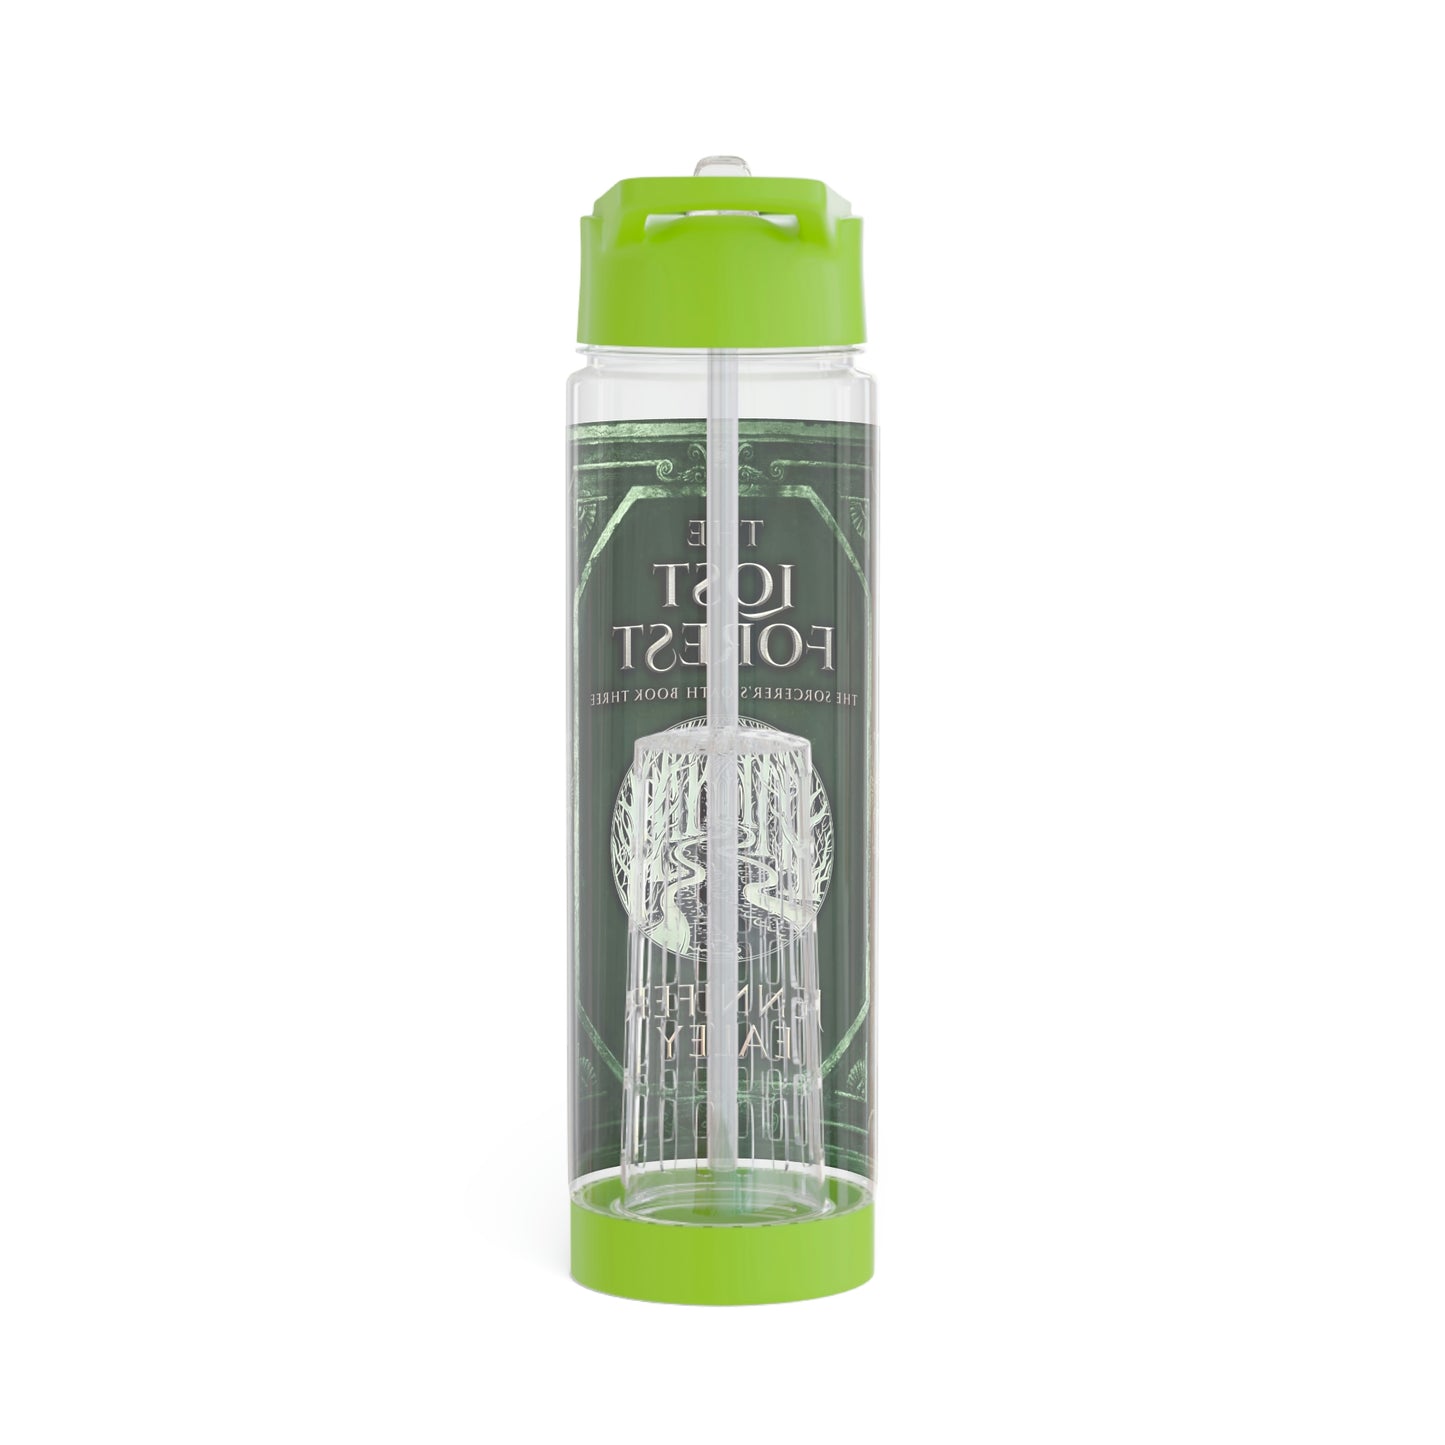 The Lost Forest - Infuser Water Bottle